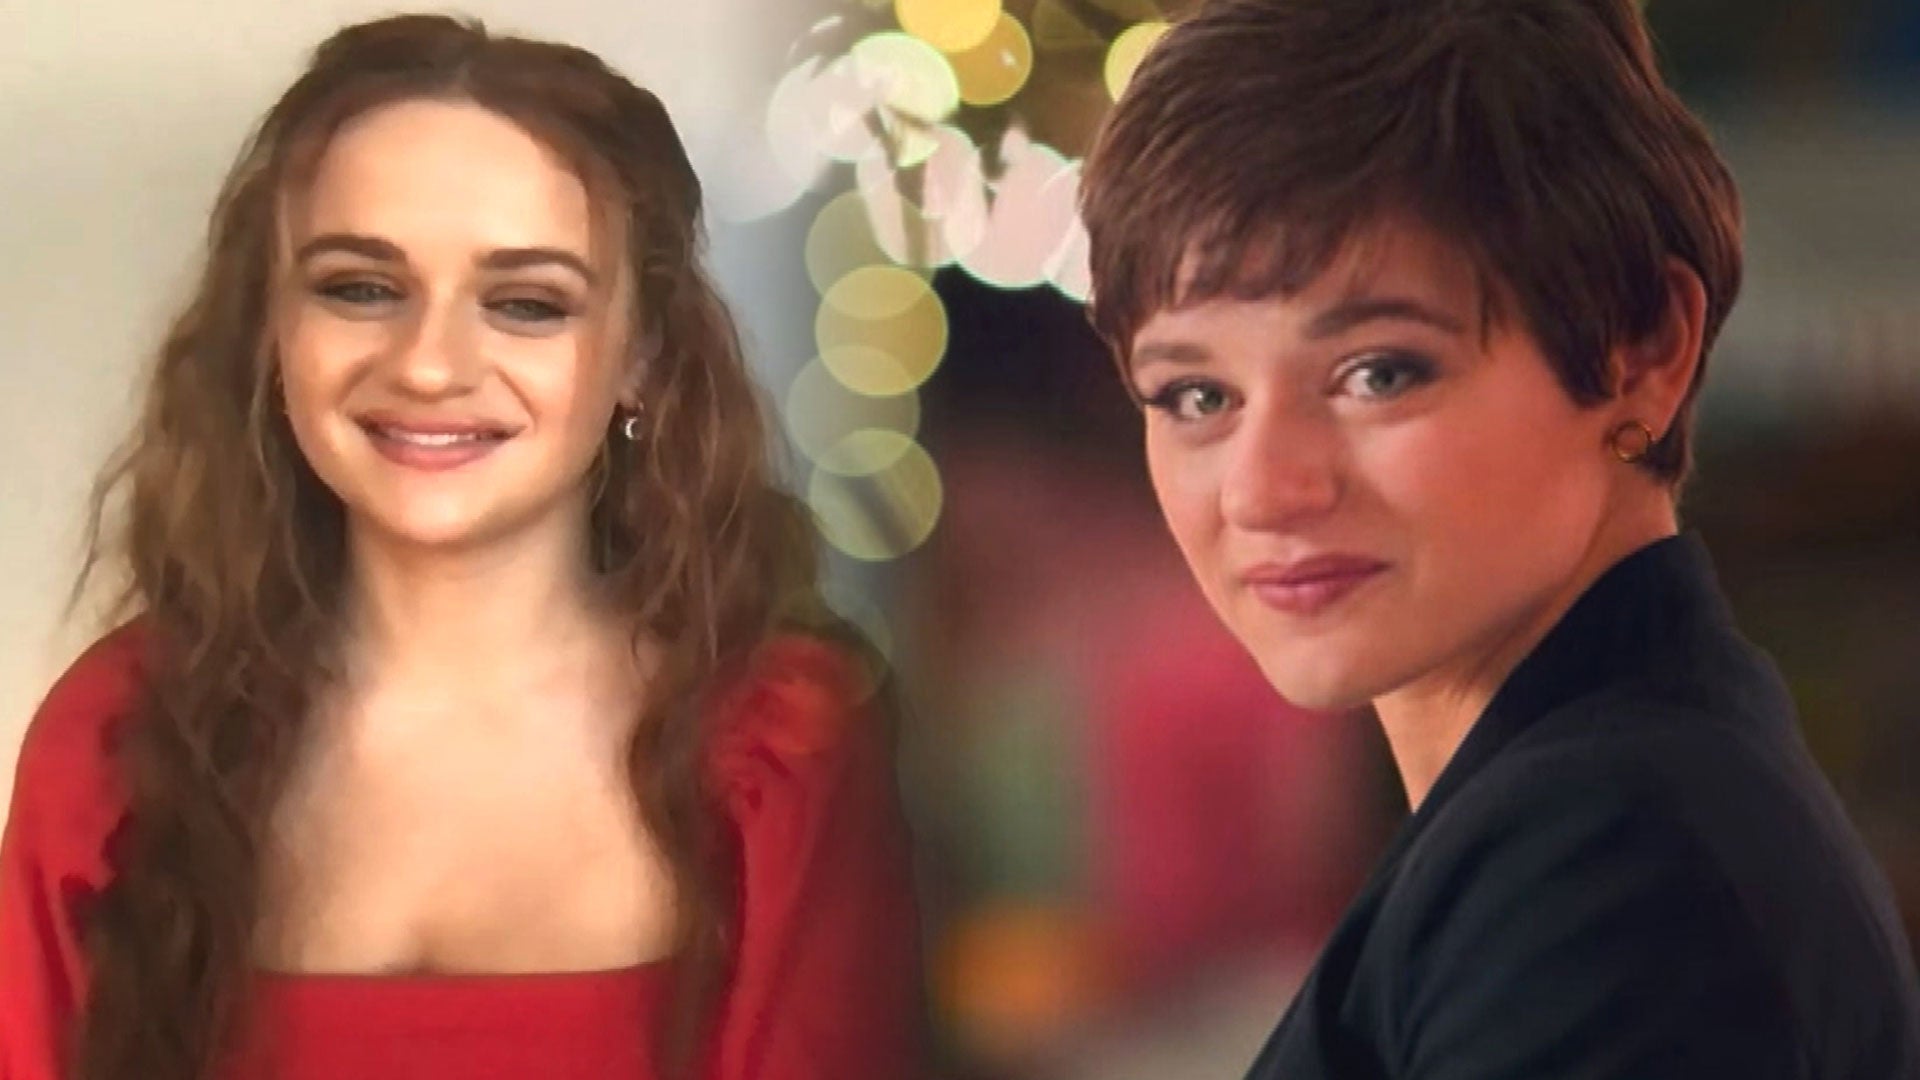 Joey King Defends Kissing Booth Movies Against Jacob Elordi